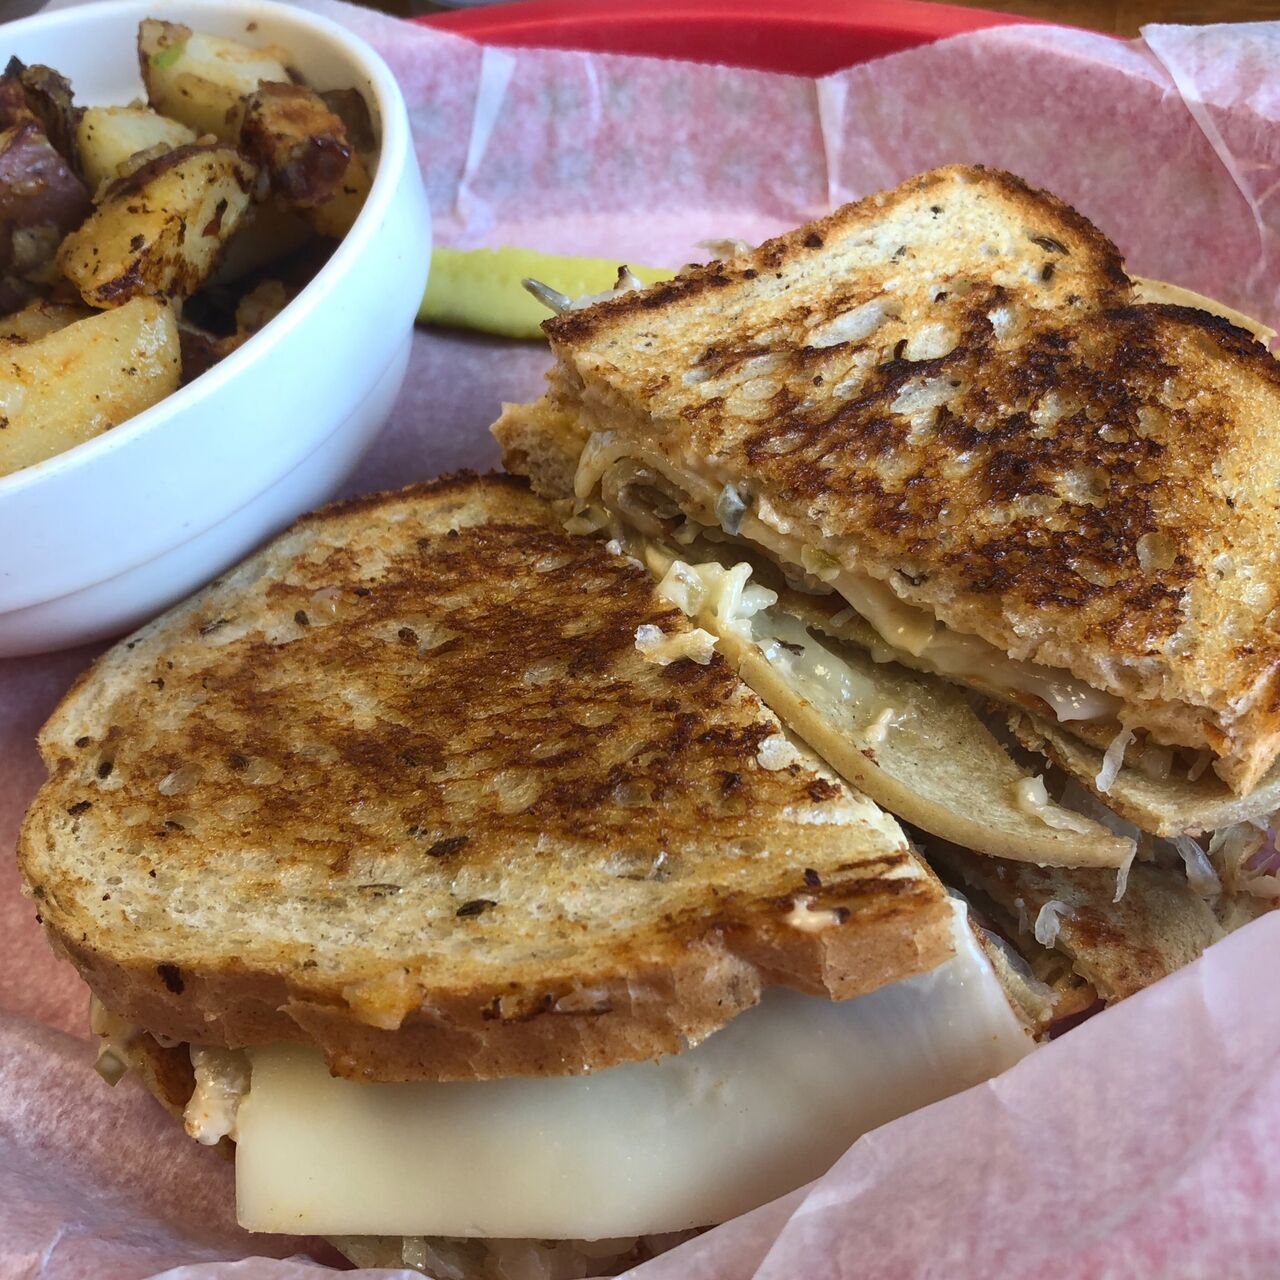 A photo of Mike's Deli at Lazy Sundae